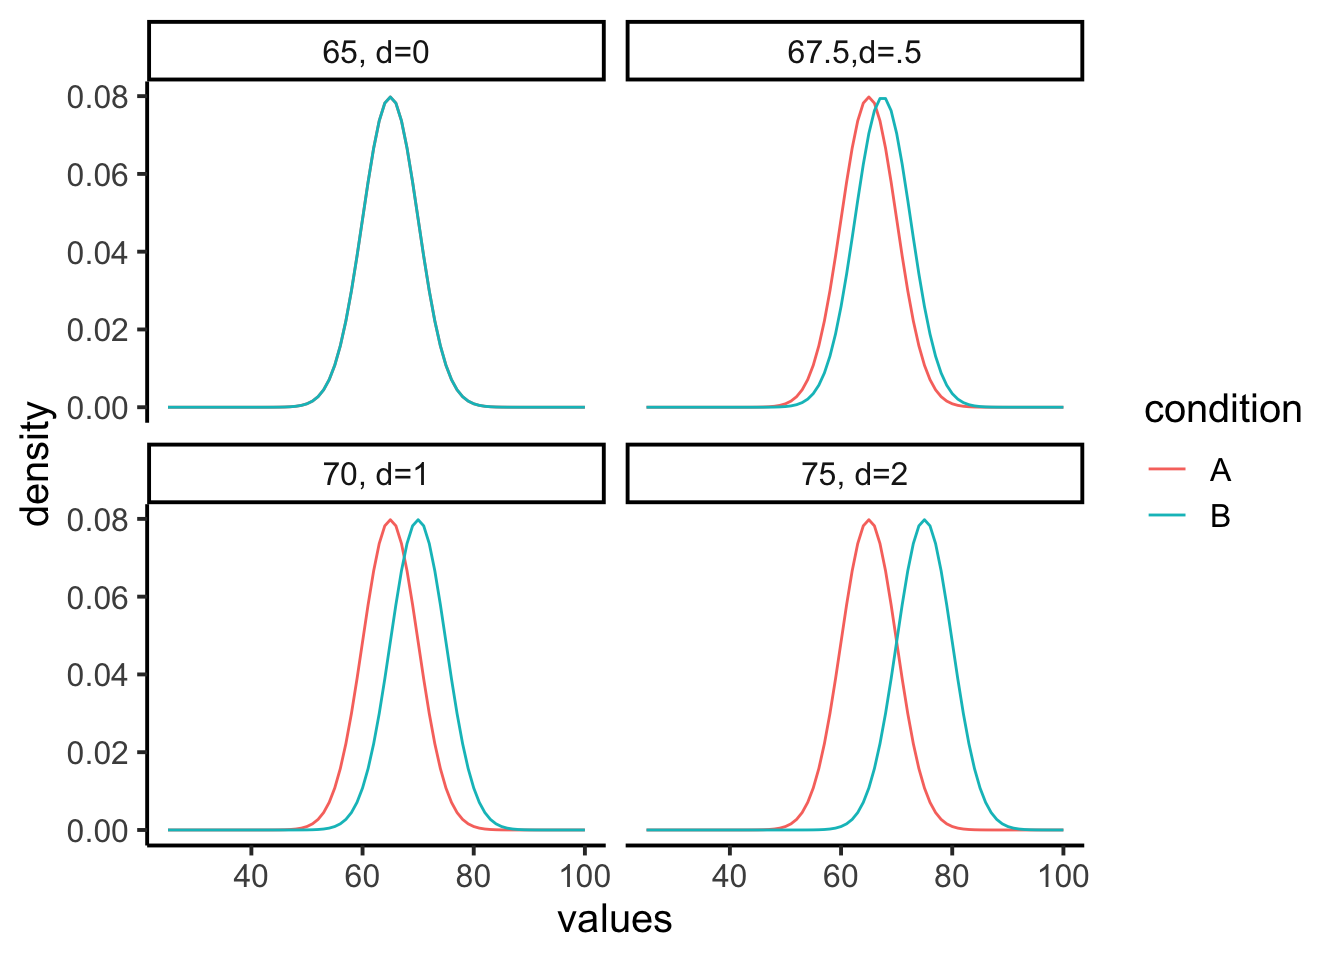 Each panel shows hypothetical distributions for two conditions. As the effect-size increases, the difference between the distributions become larger